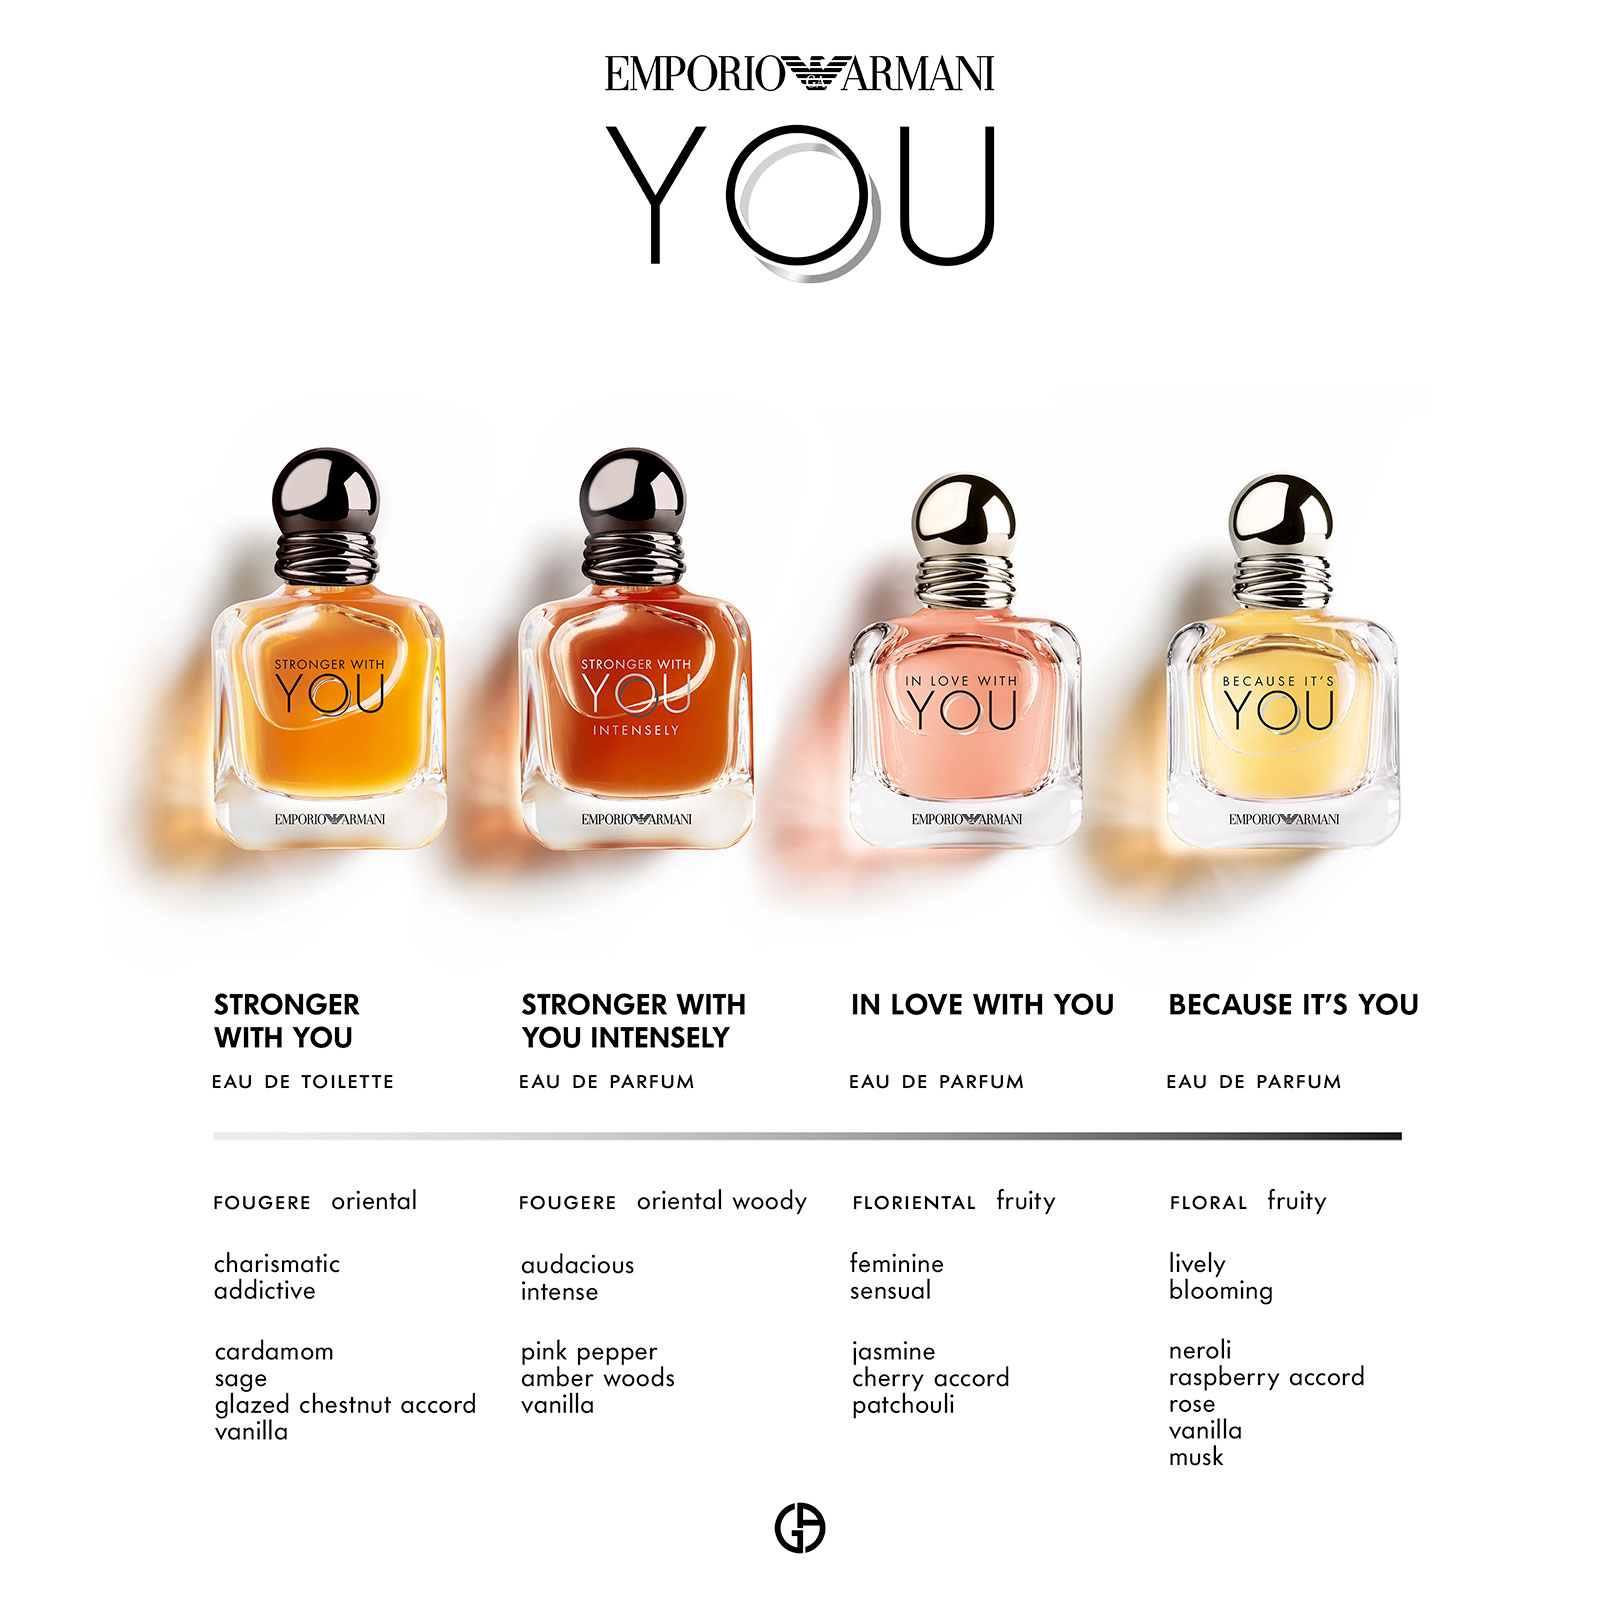 because it's you 50 ml